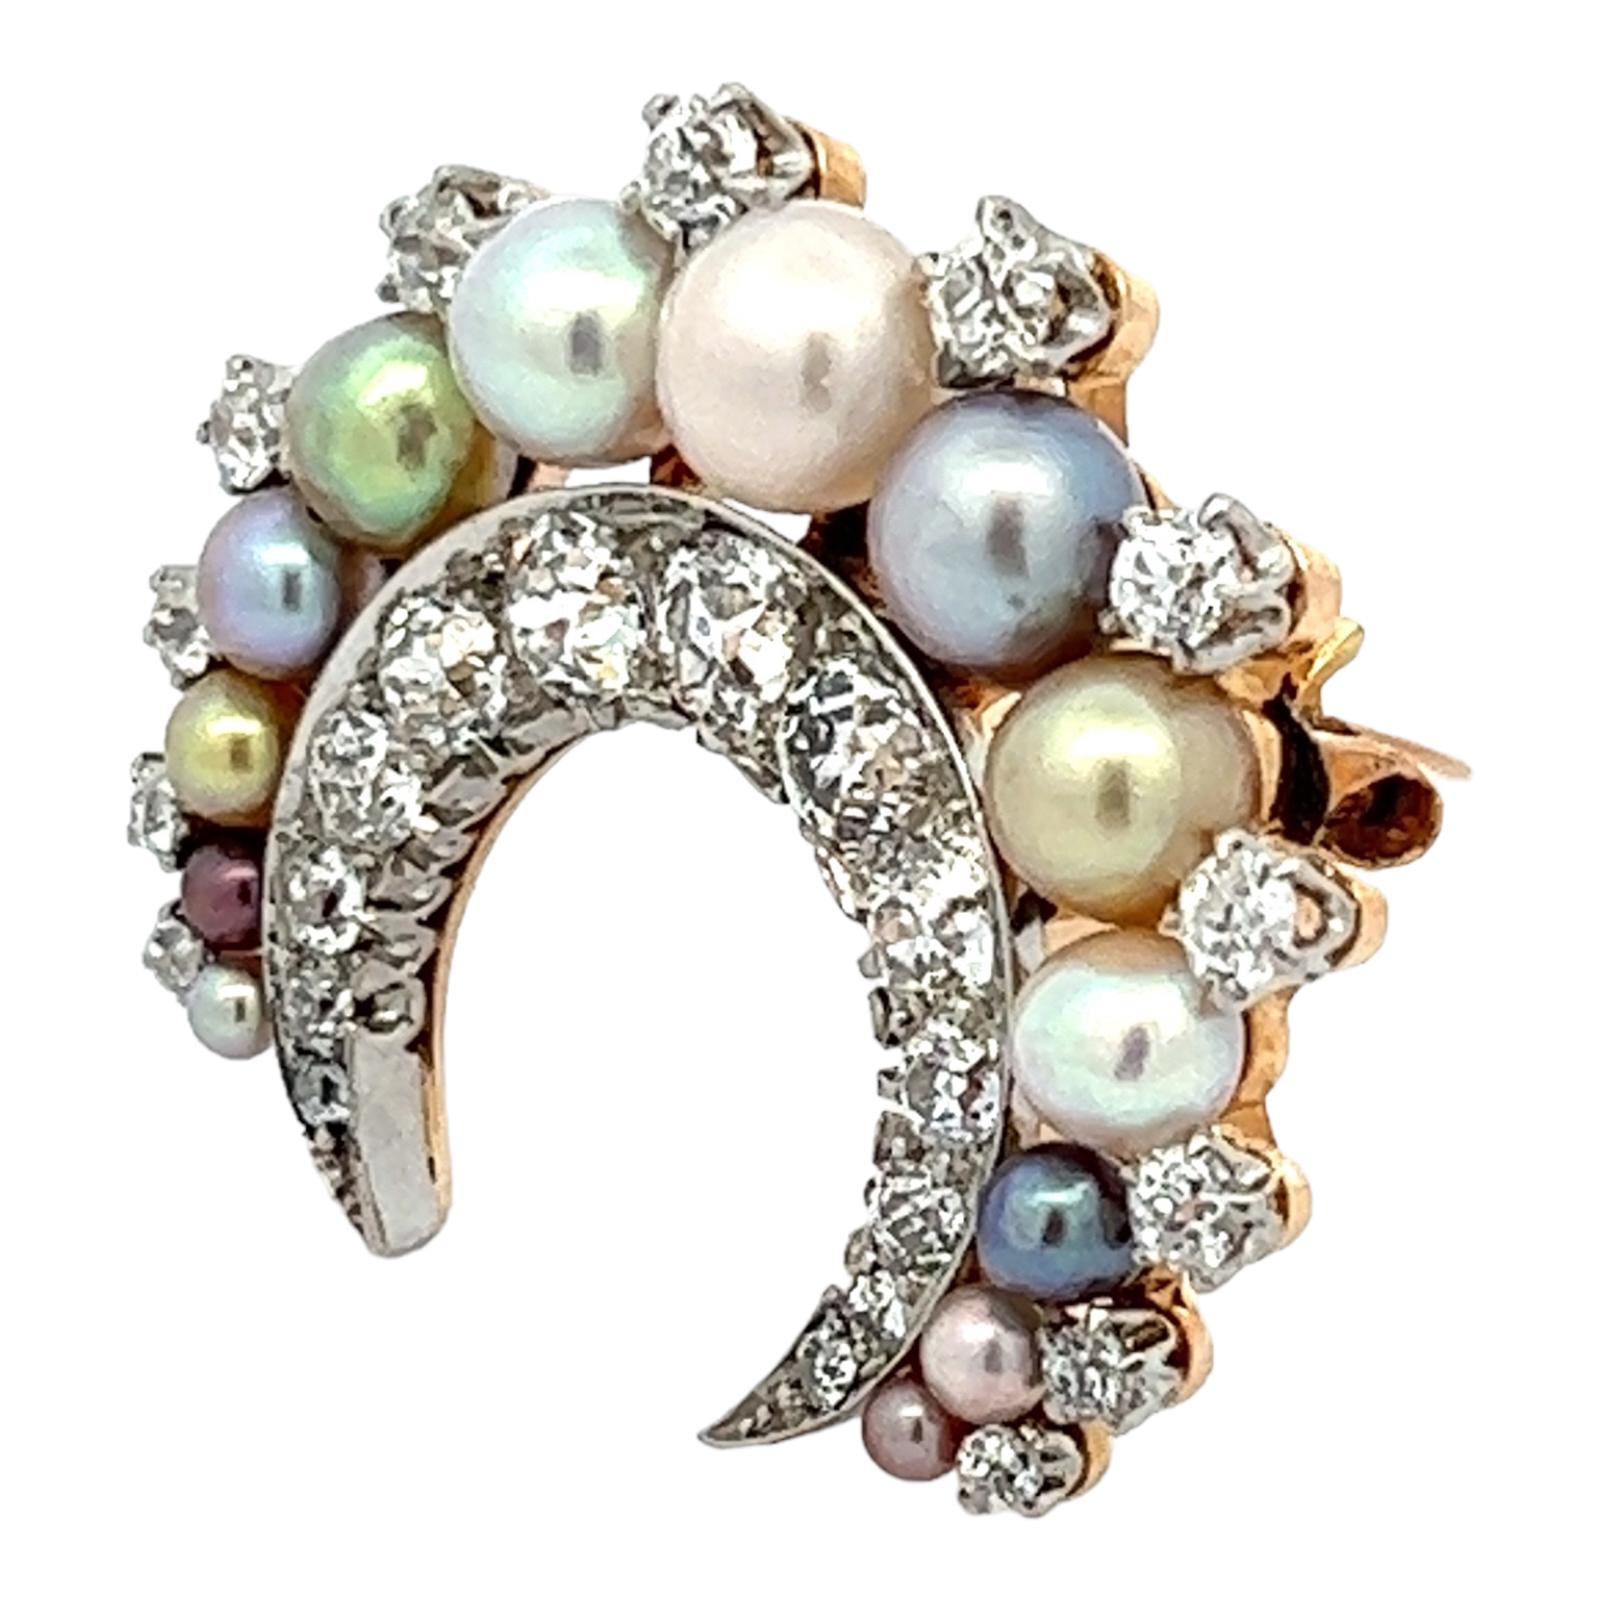 An original Edwardian diamond pearl crescent brooch handcrafted in platinum and 18 karat yellow gold. The brooch features multi-color graduated pearls and 25 Old Mine Cut Diamonds weighing approximately 2.00 carat total weight. The diamonds are